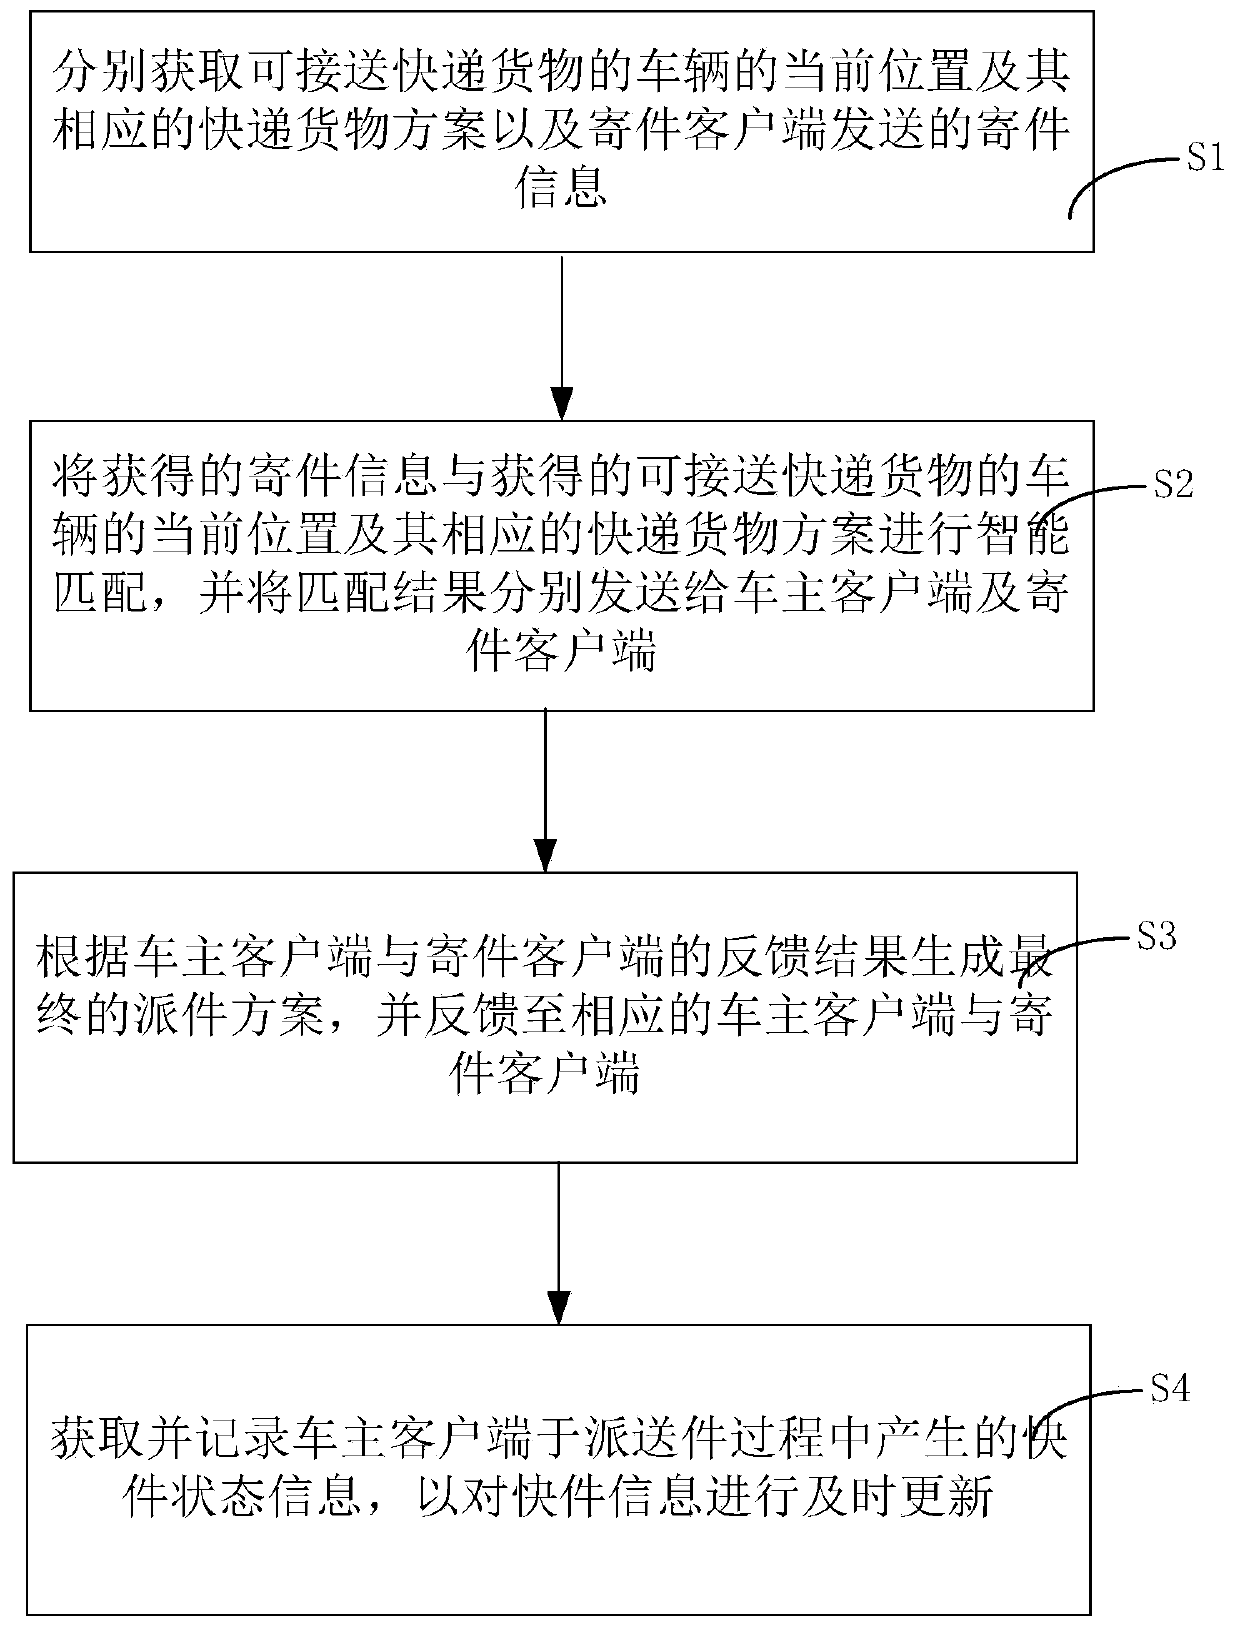 Logistics information processing platform and system and delivery and receiving processing method thereof